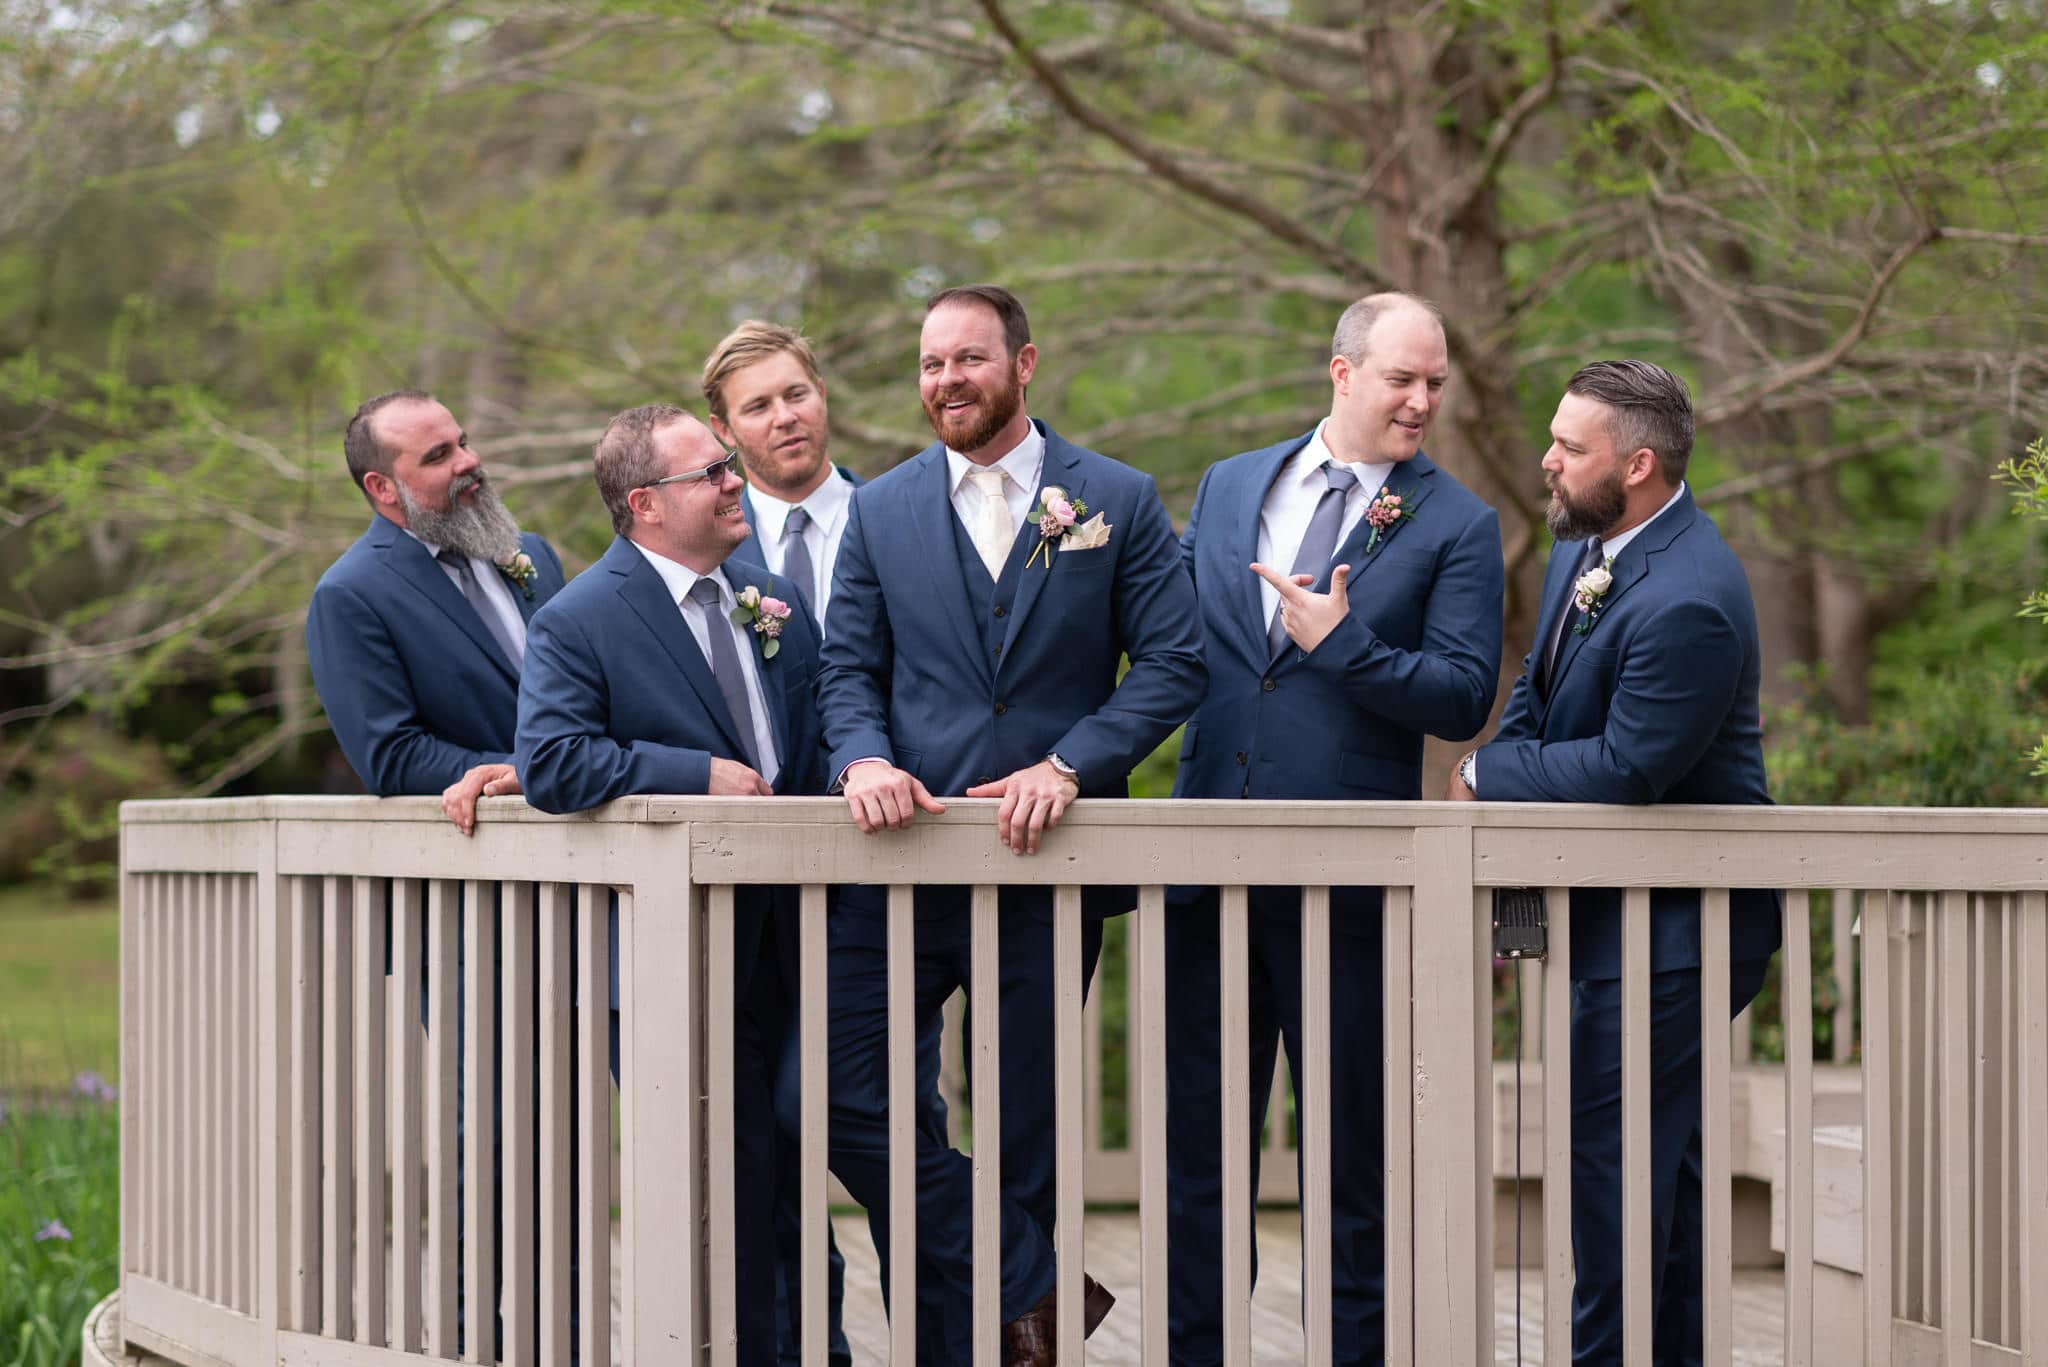 Groomsmen laughing before the ceremony - Brookgreen Gardens